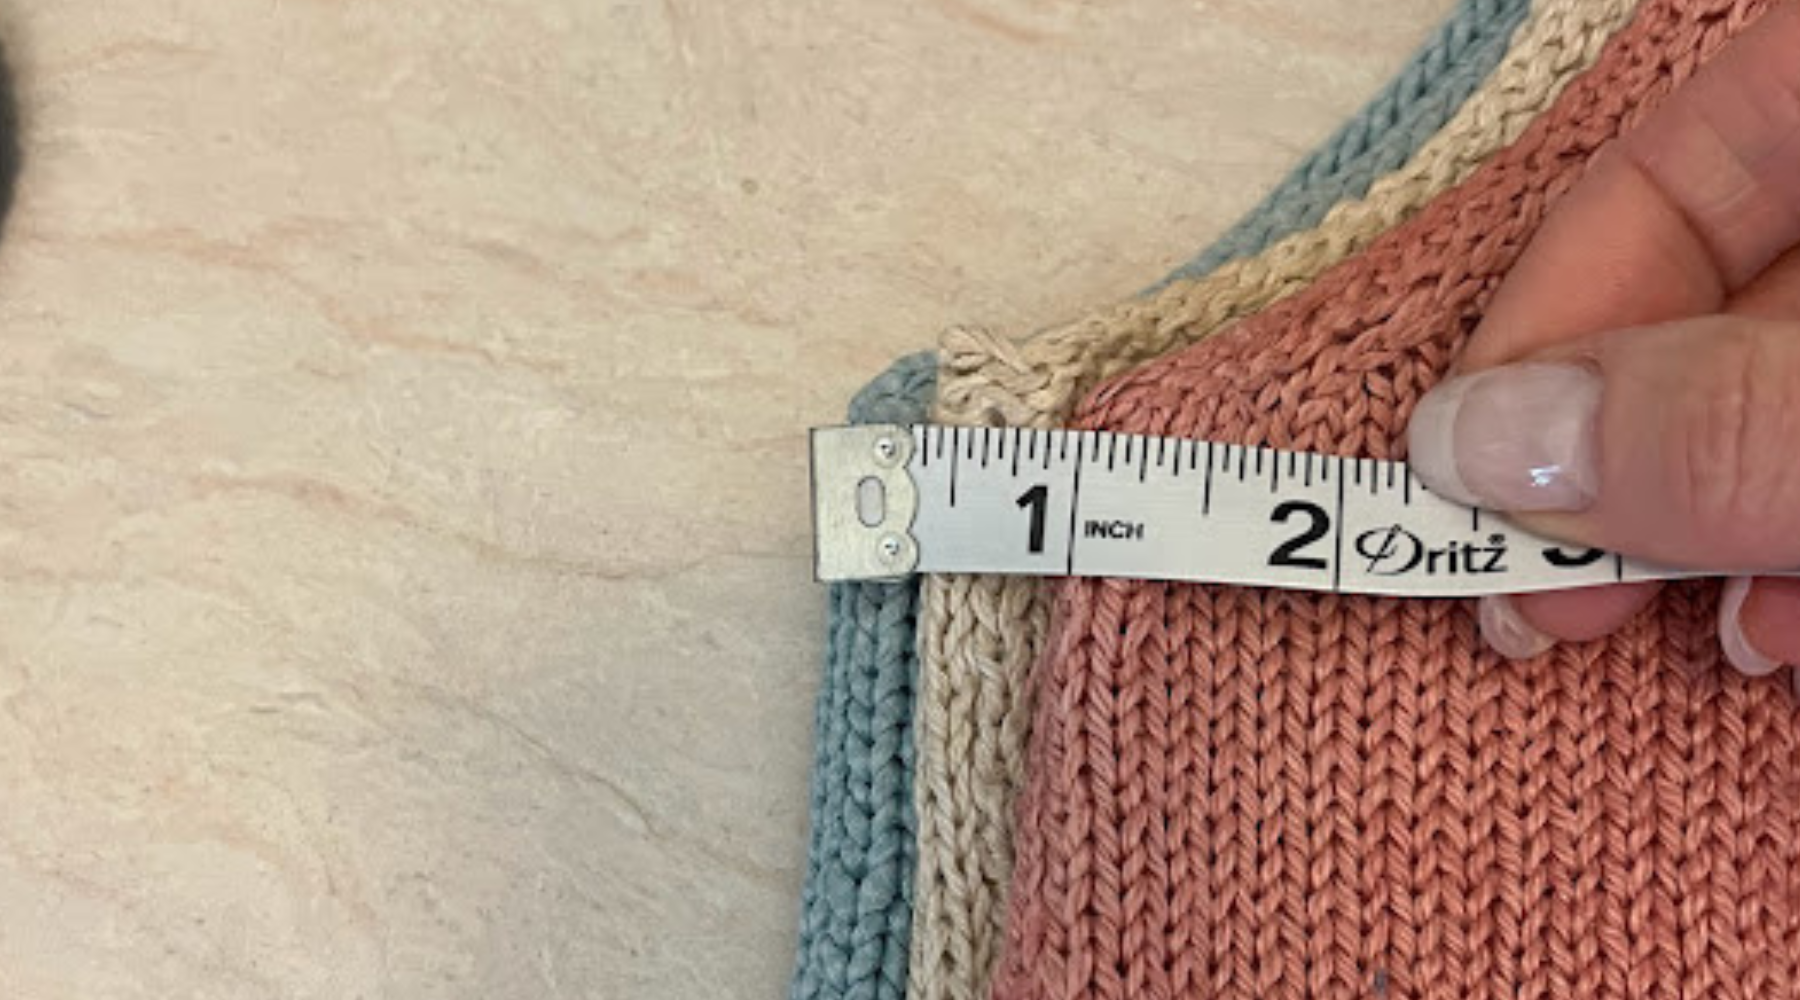 What size should I choose to knit?